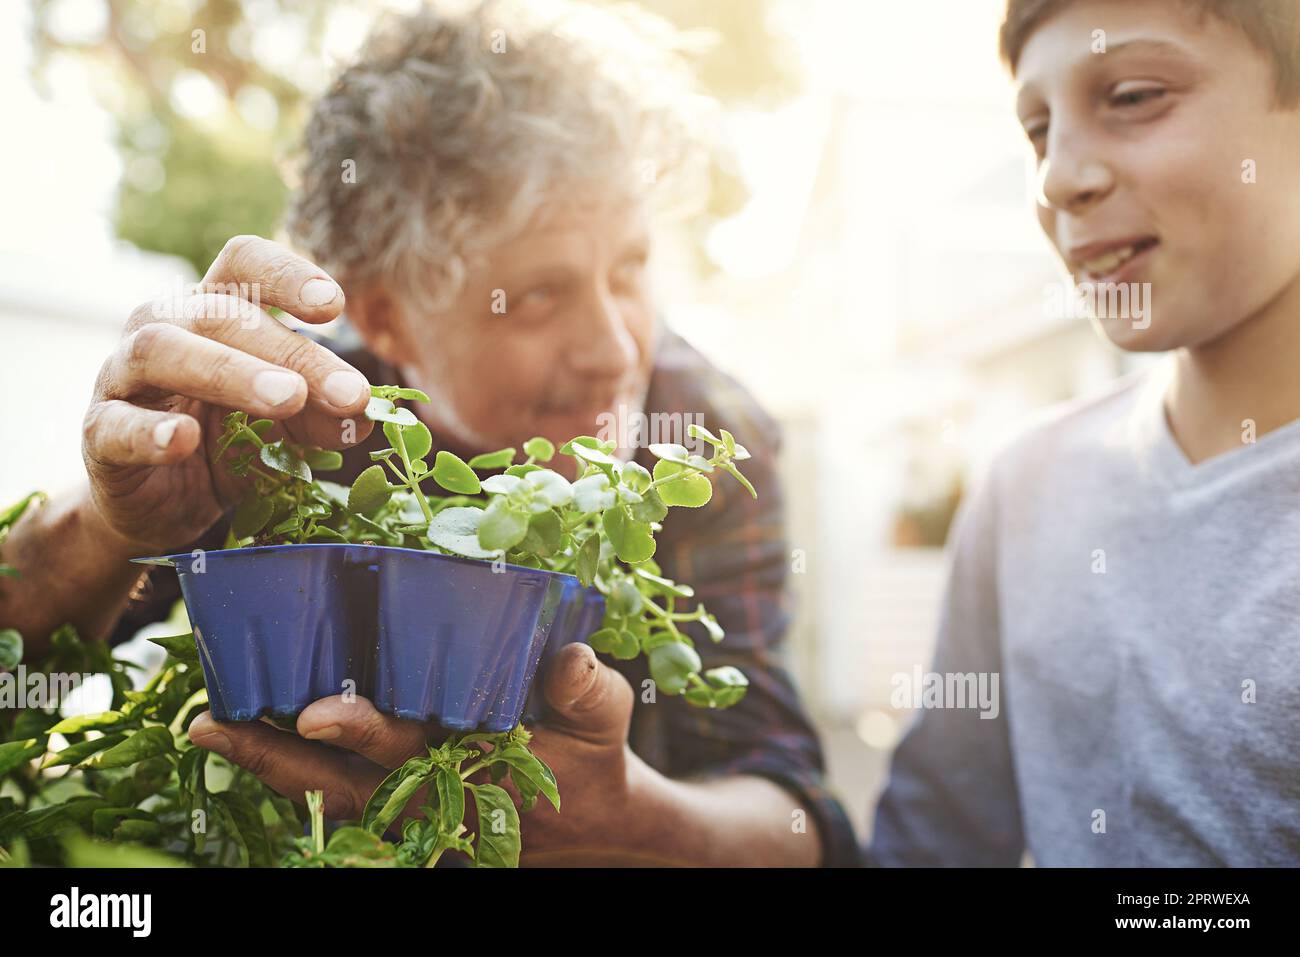 Passionate about plants. a grandfather teaching his grandson about gardening. Stock Photo